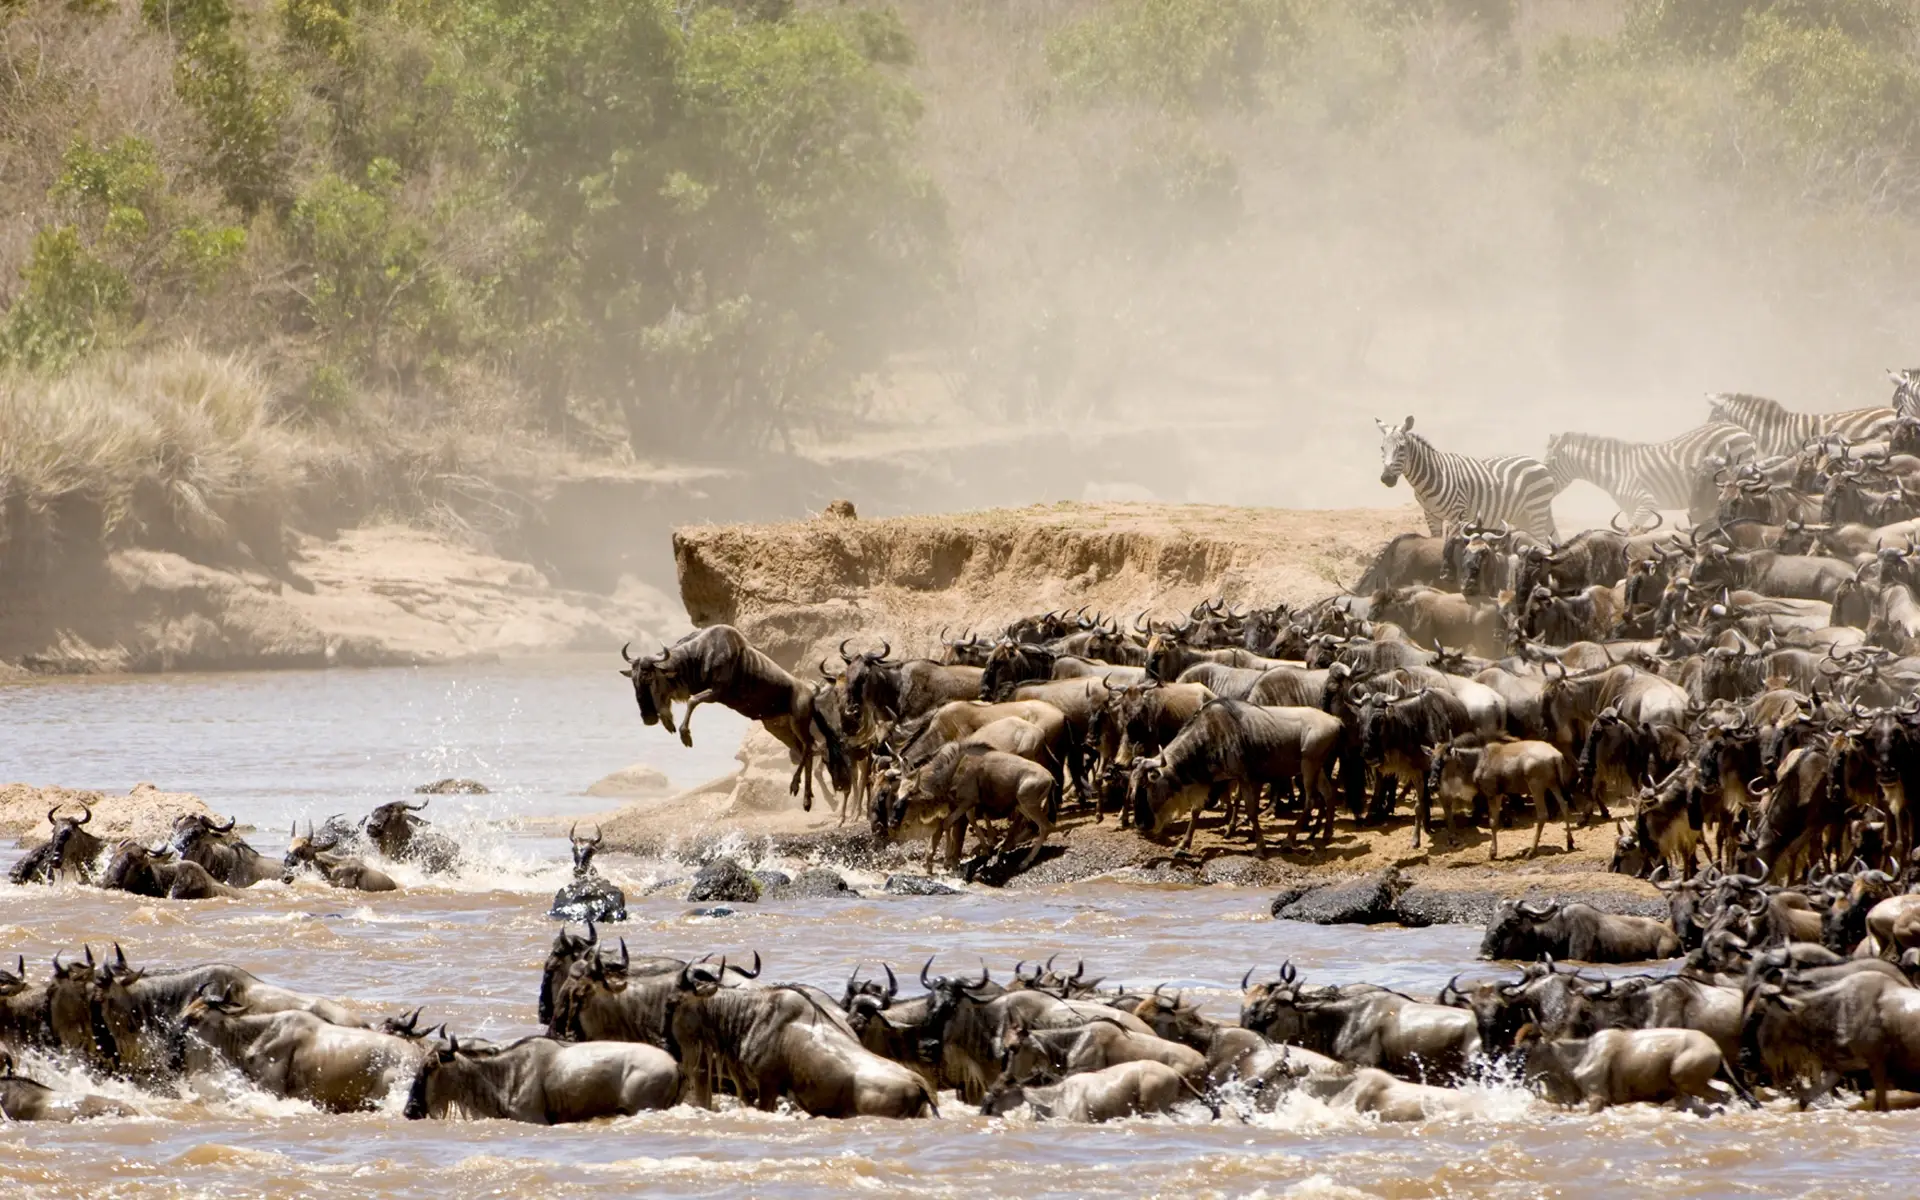 The Great Migration River crossing of wildebeest and zebras on the Mara River.